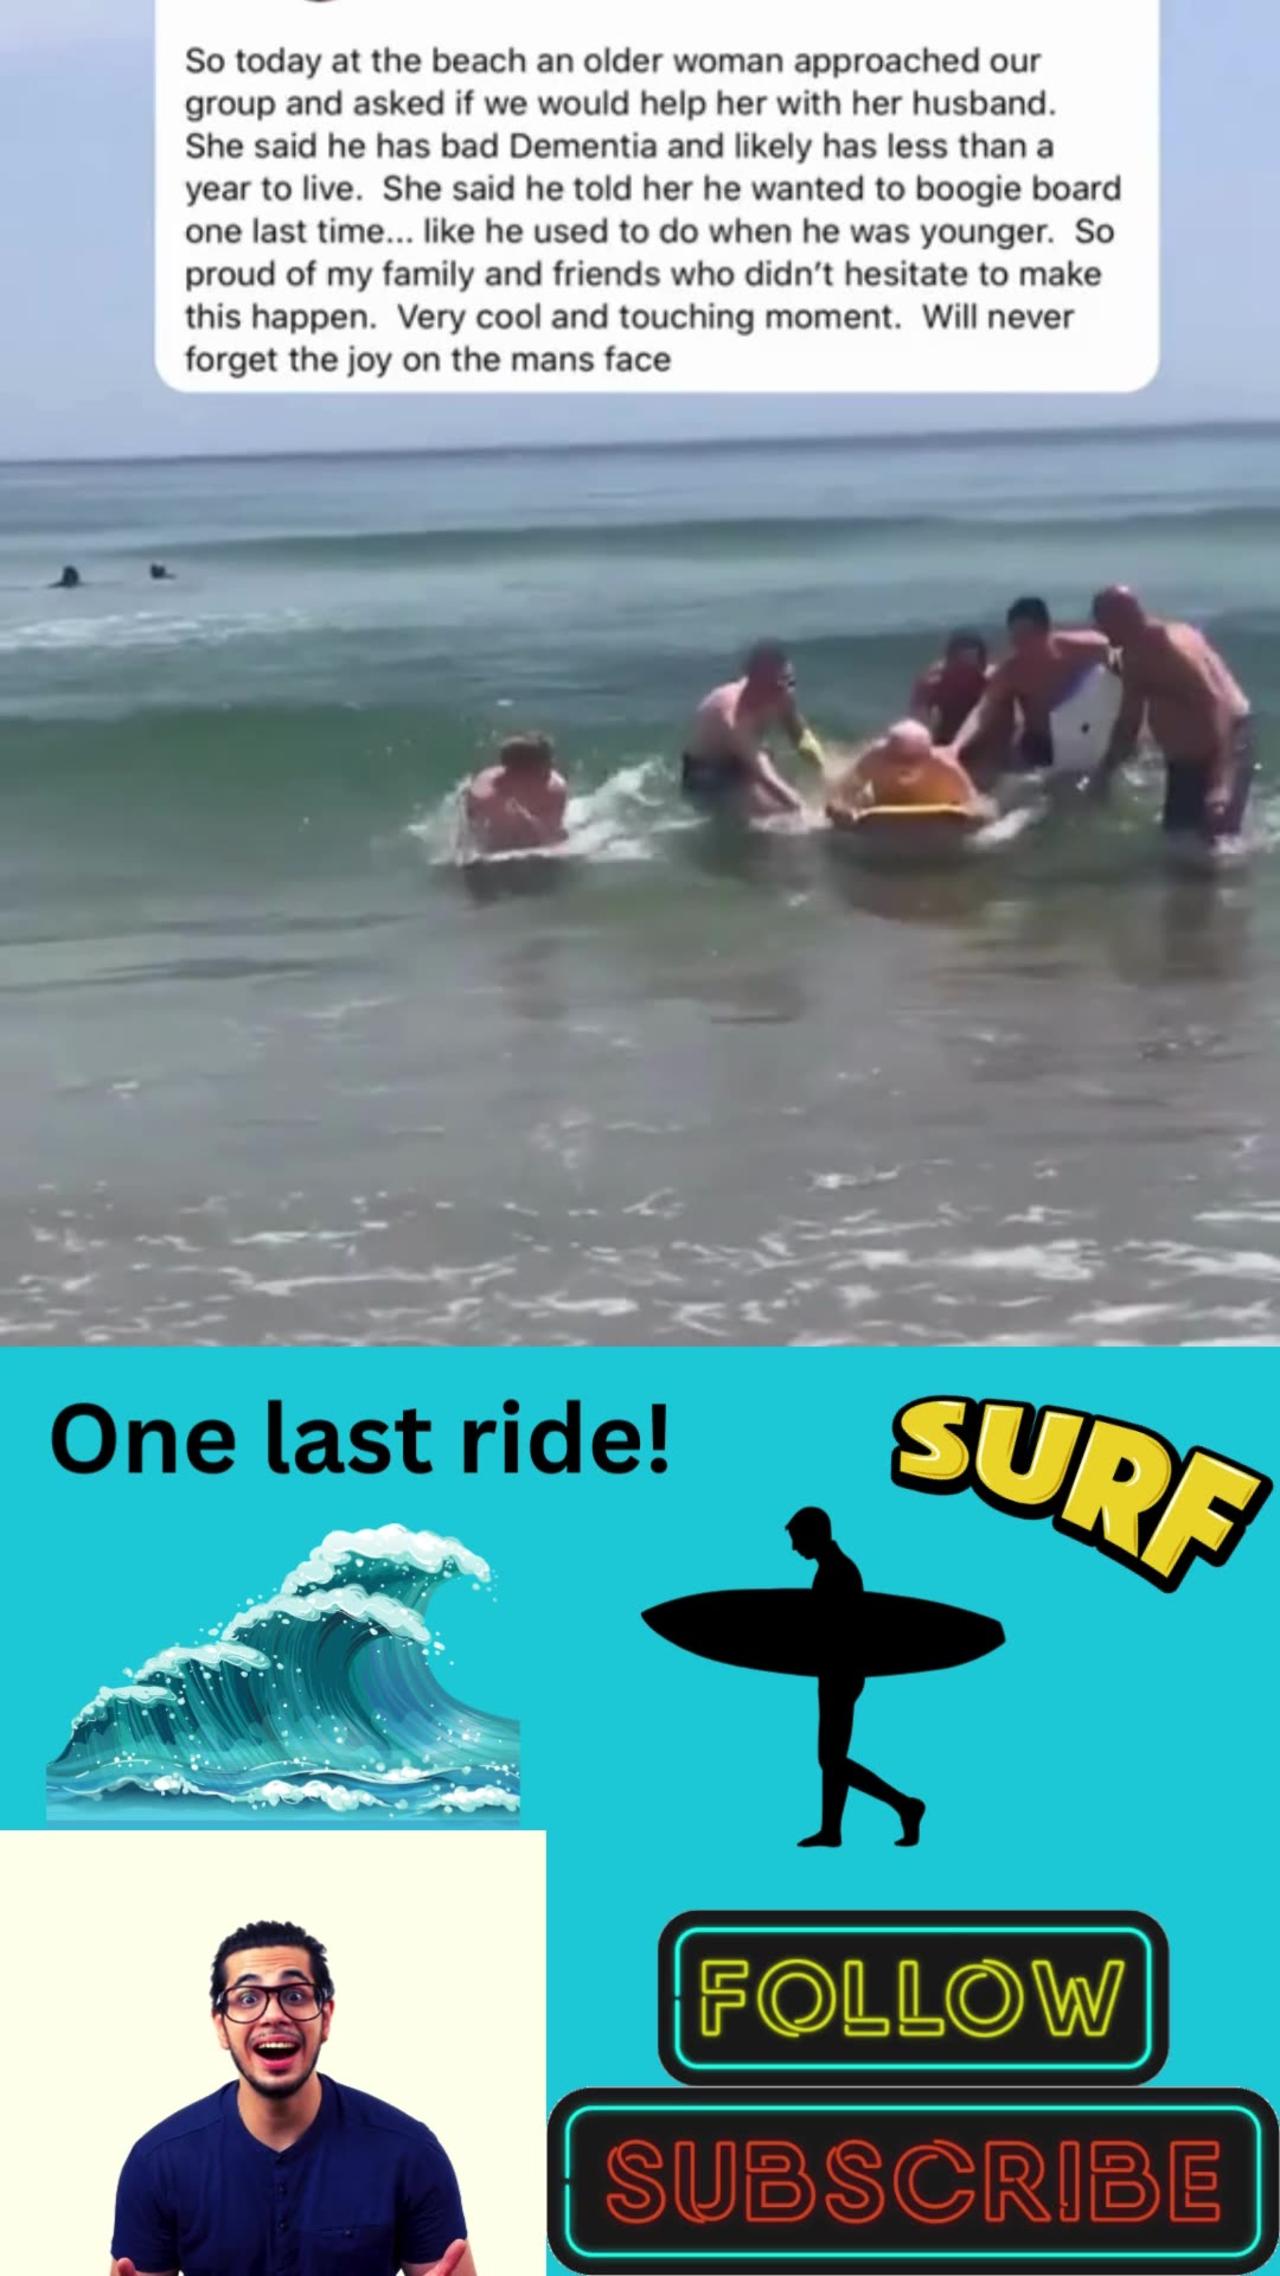 One last ride. Touching!